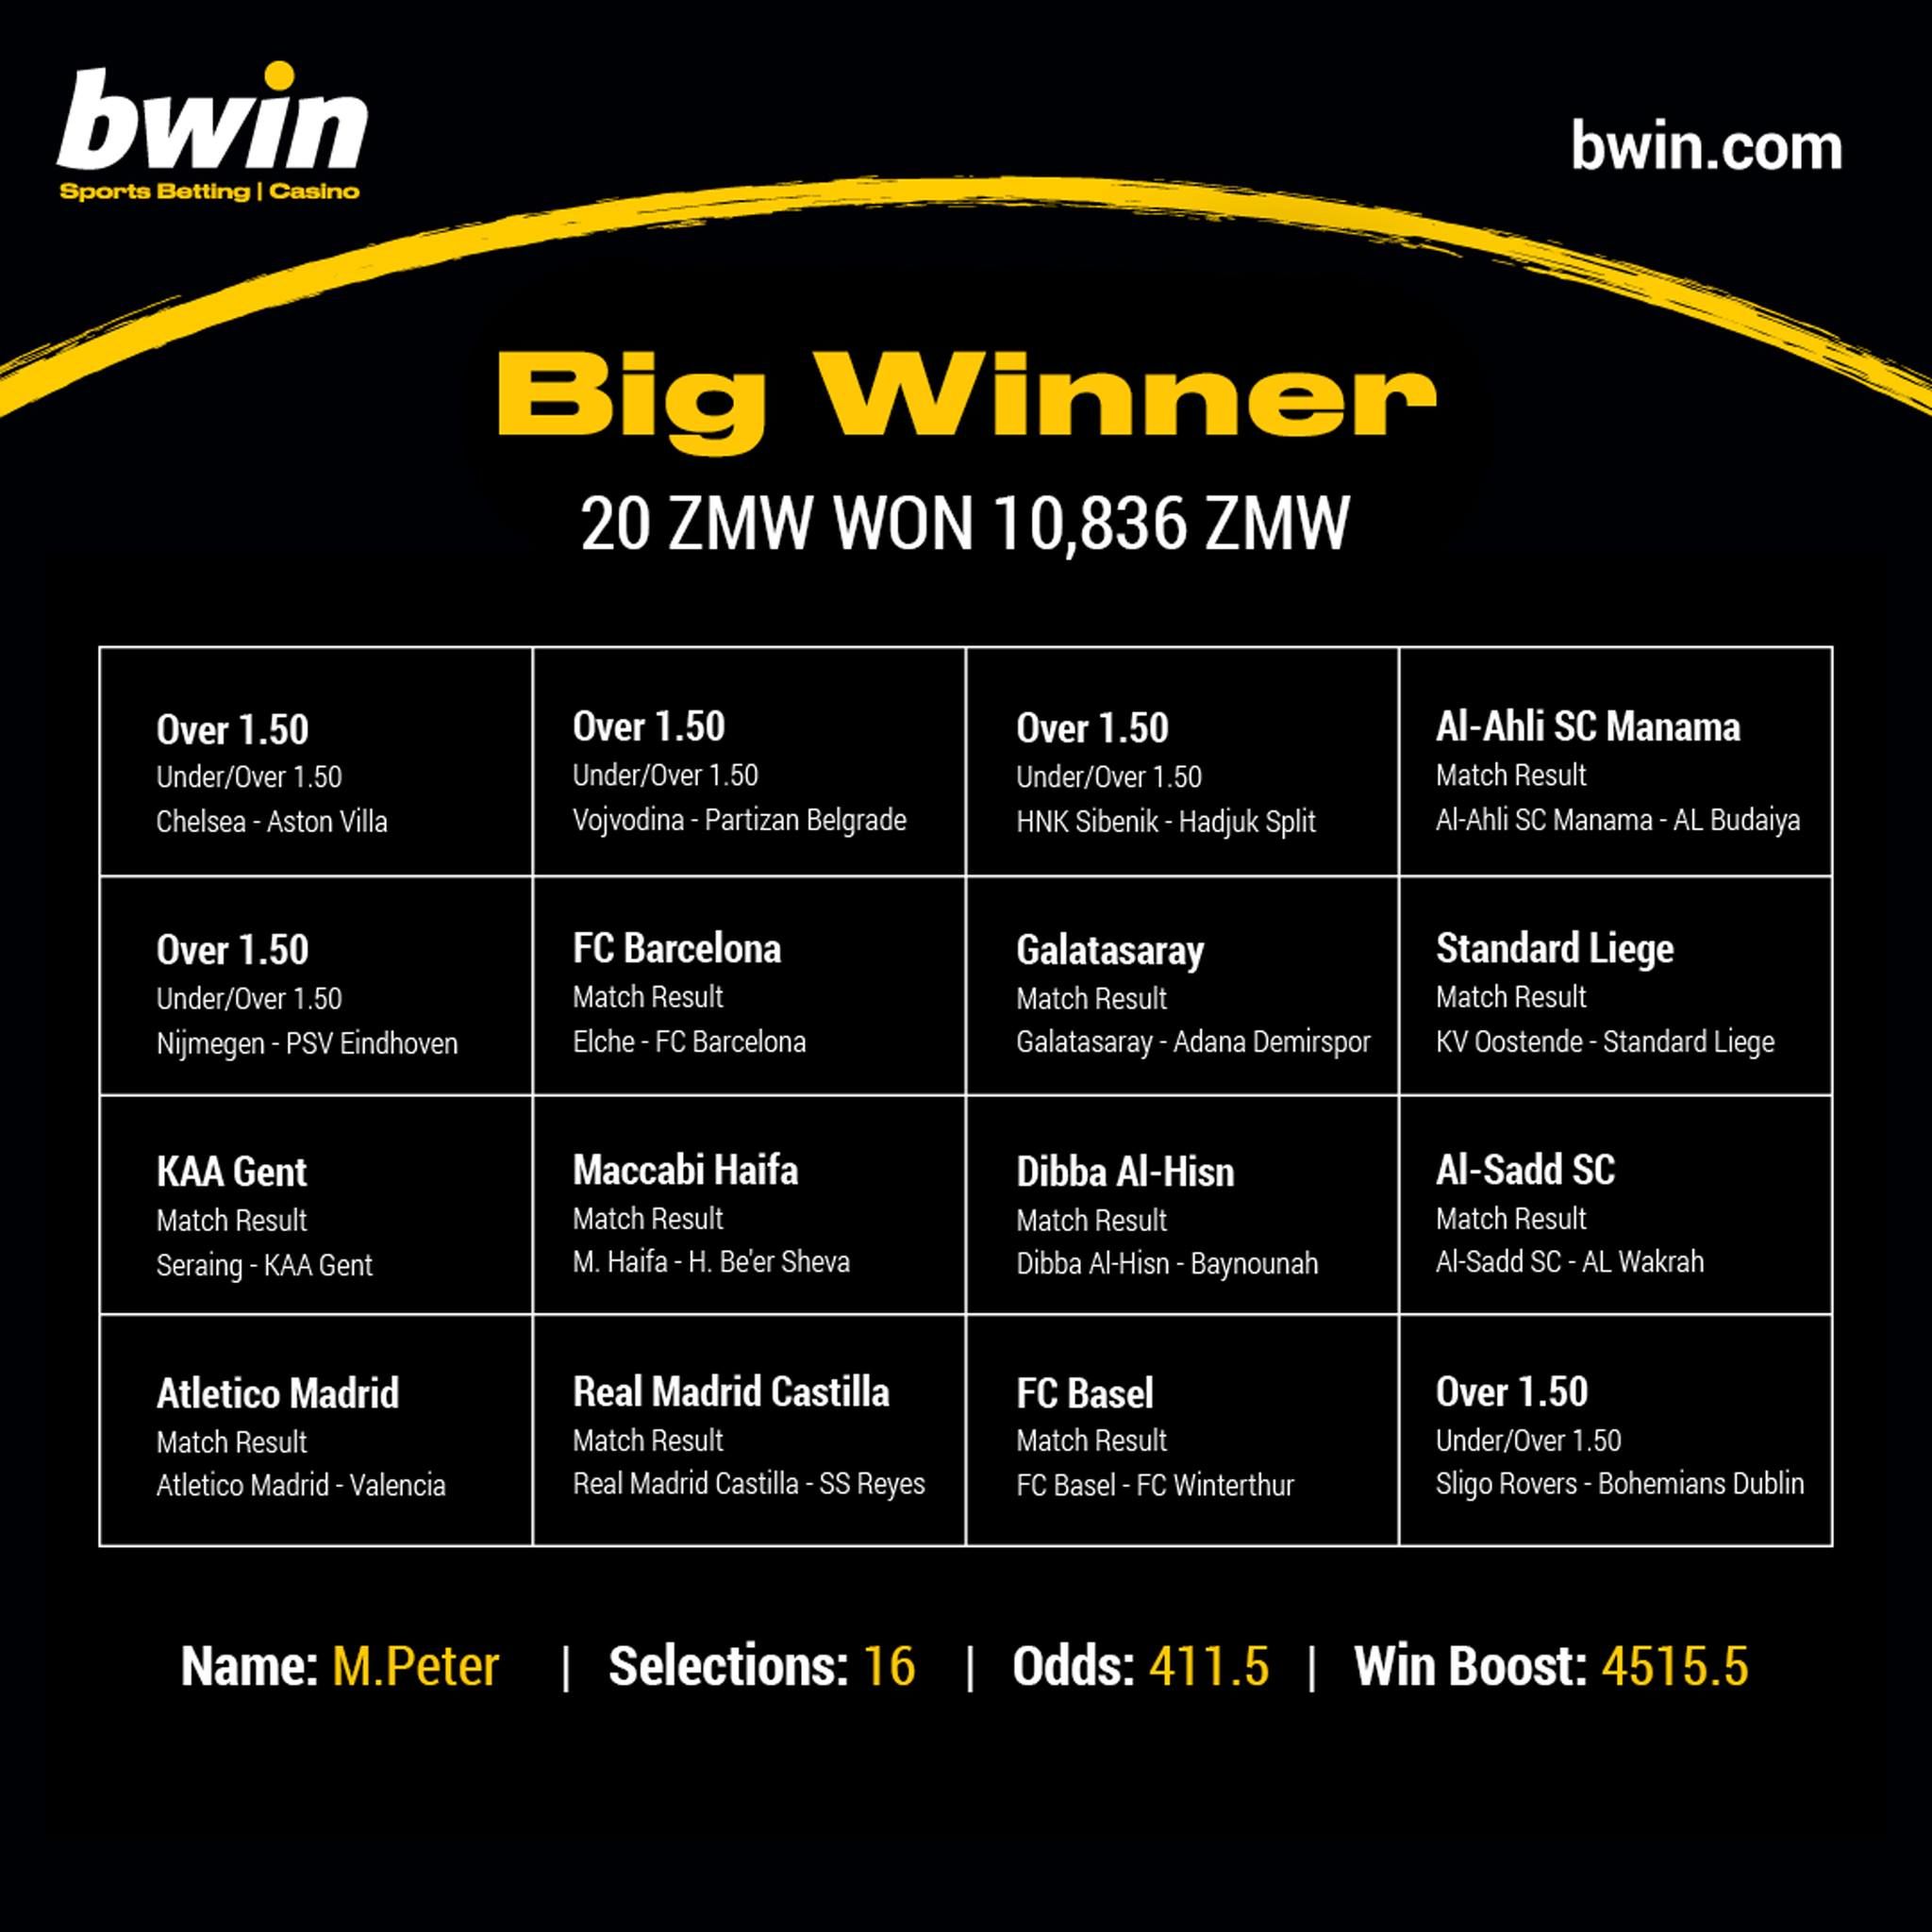 Bwin User Wins $600 By Placing Only $1 On a 16-Selections Ticket